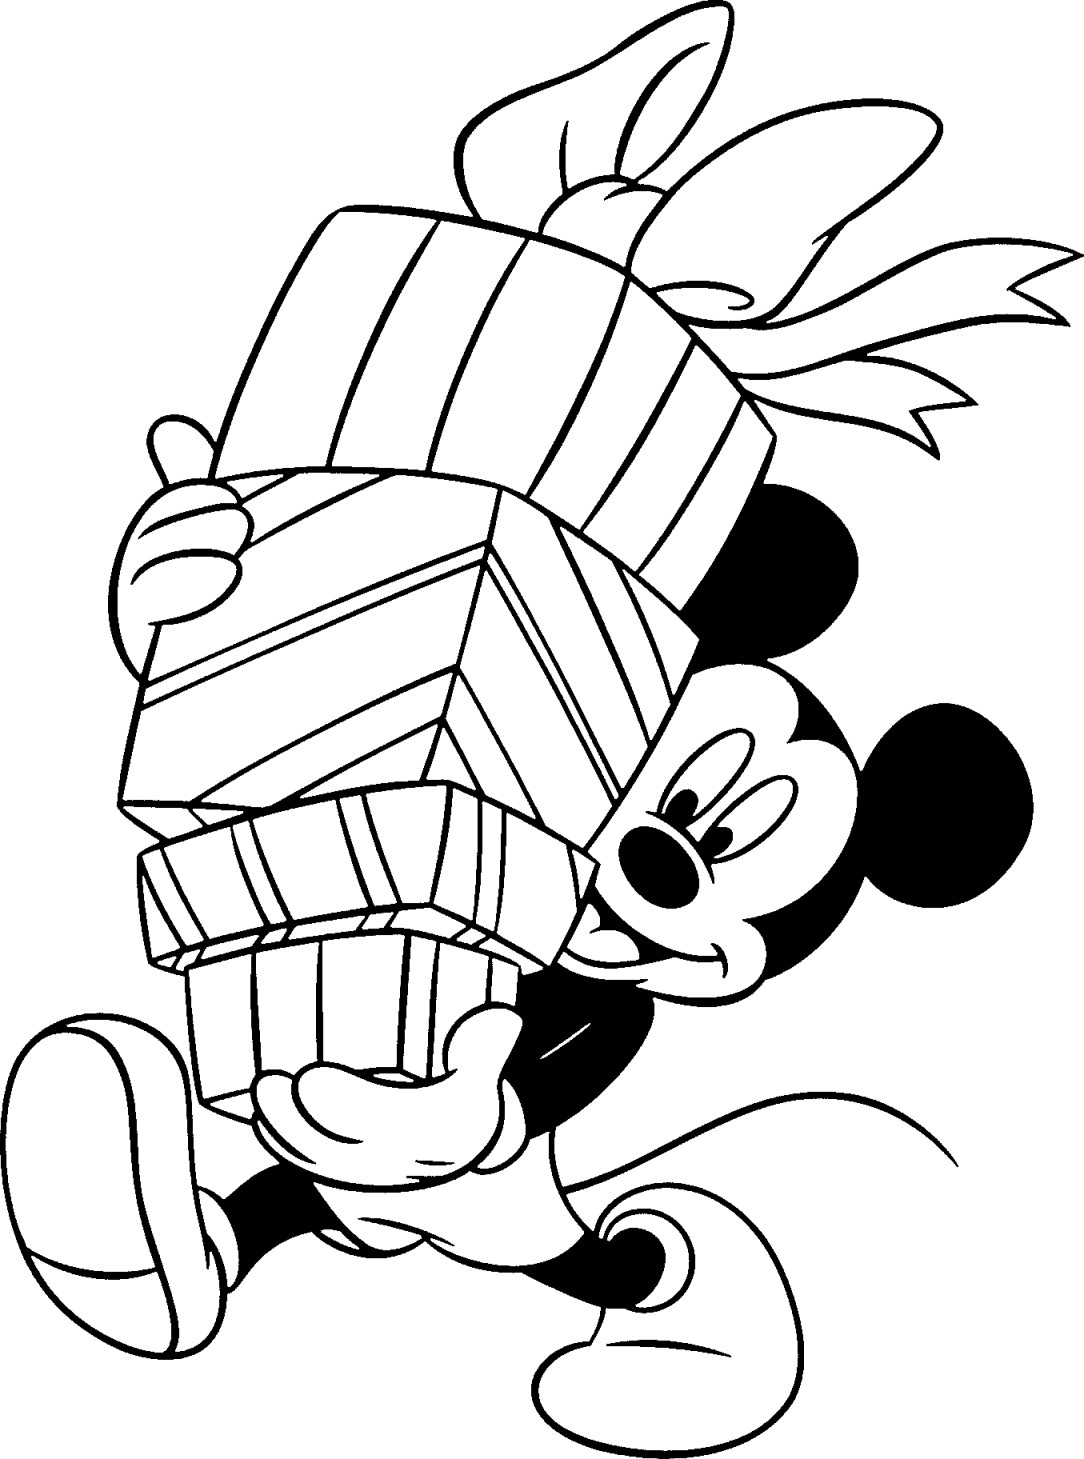 Free Printable Coloring Pages Christmas
 Coloring Pages Christmas Disney Disney Coloring Pages